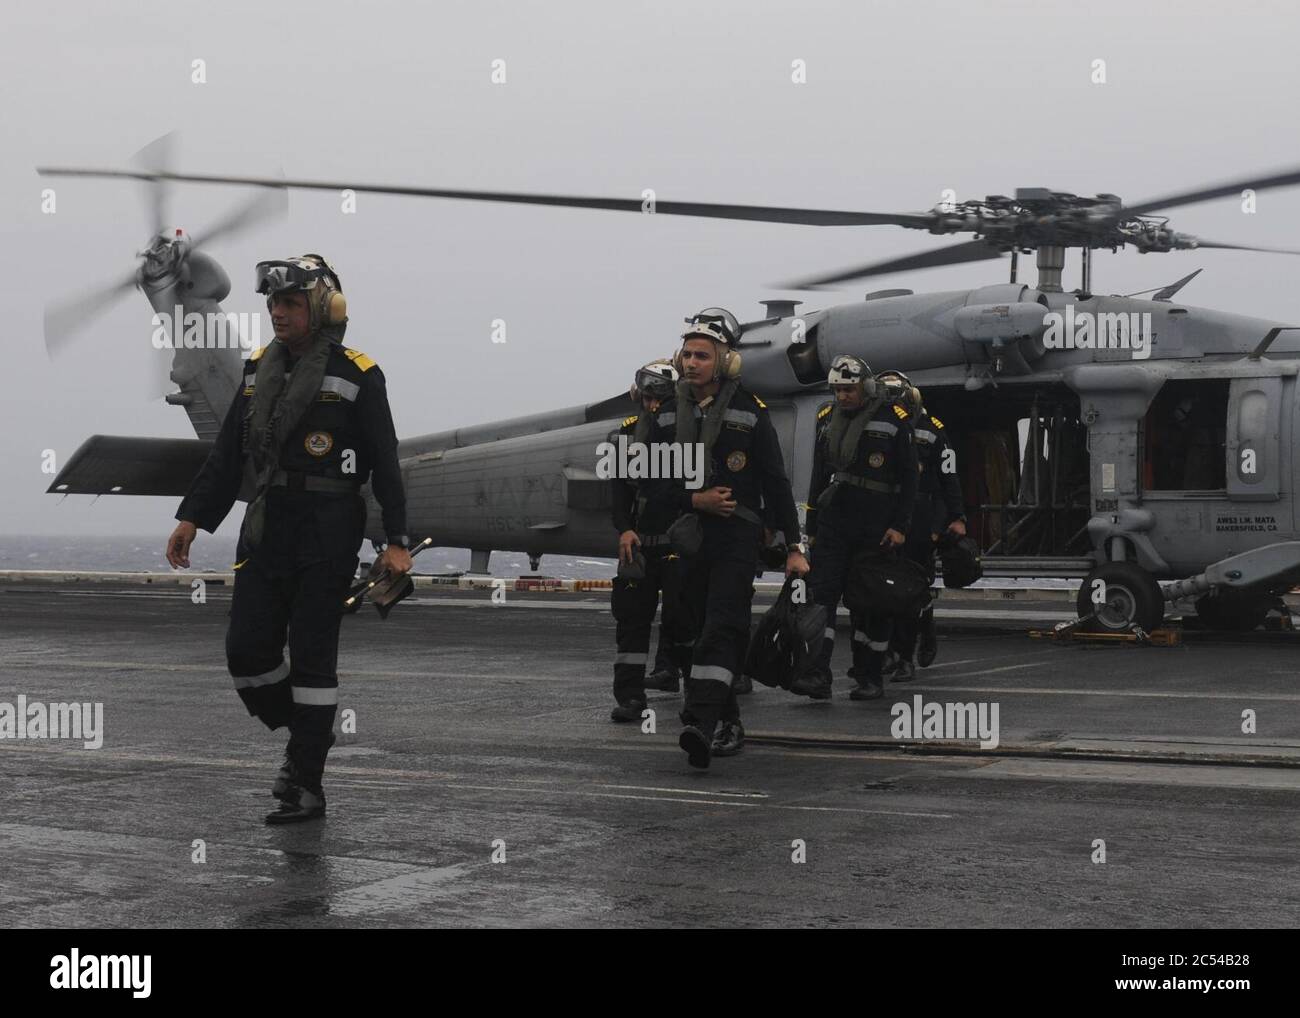 Indian Navy Rear Admiral Biswajit Dasgupta, flag officer commanding eastern fleet, transits the flight deck of the aircraft carrier USS Nimitz (CVN 68) after arriving aboard via an MH-60R Seahawk helicopter. Stock Photo